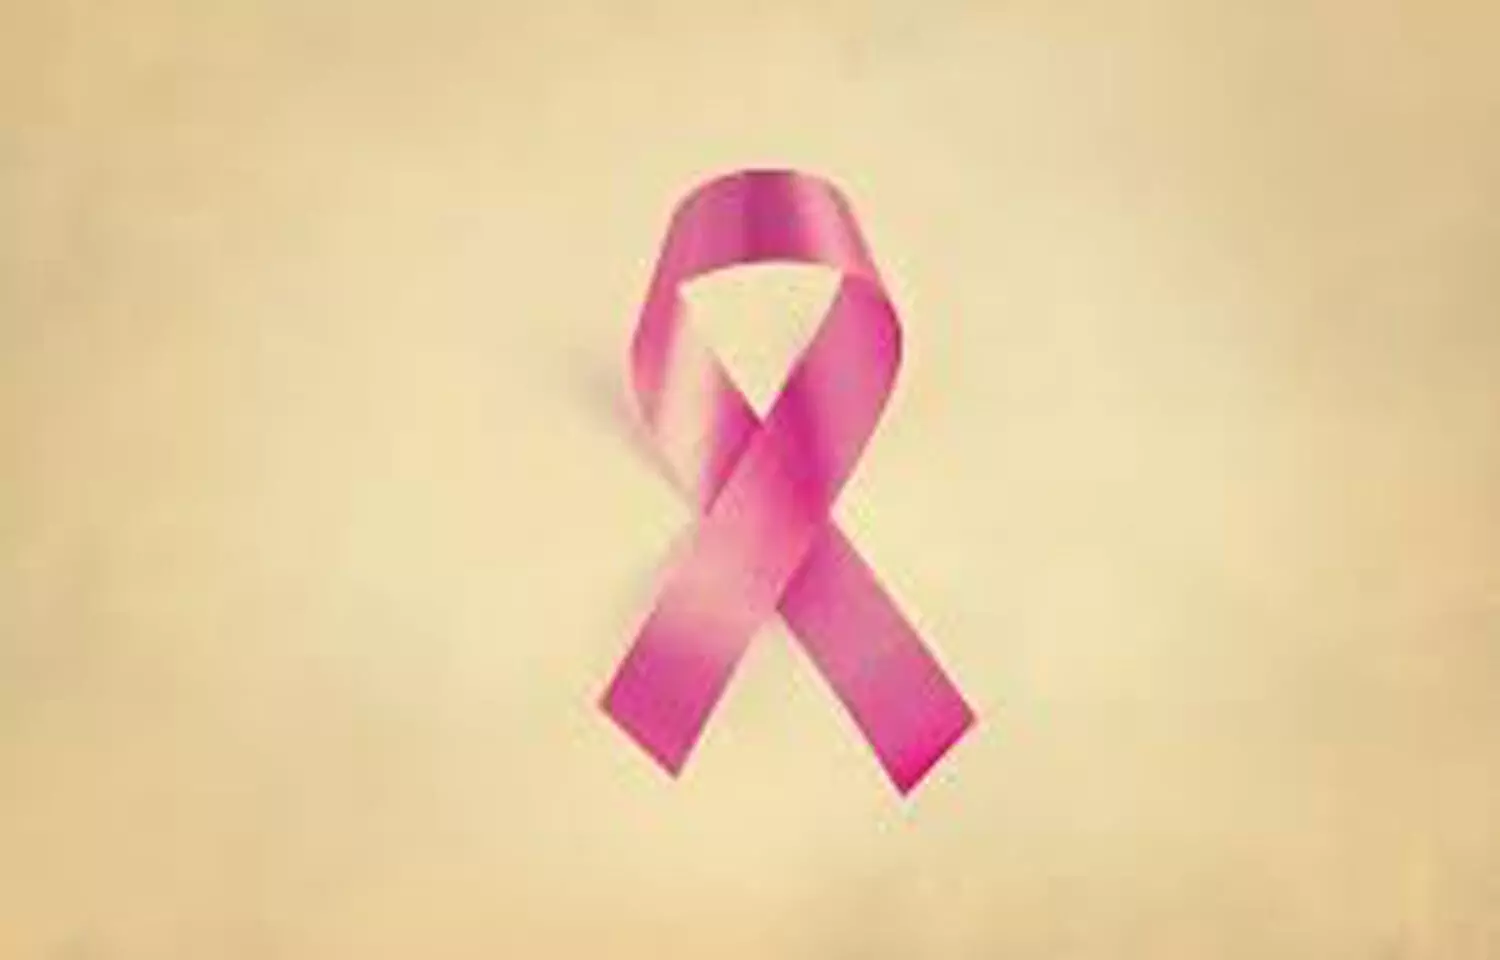 Chronic stress may impact treatment and survival outcomes in patients with breast cancer